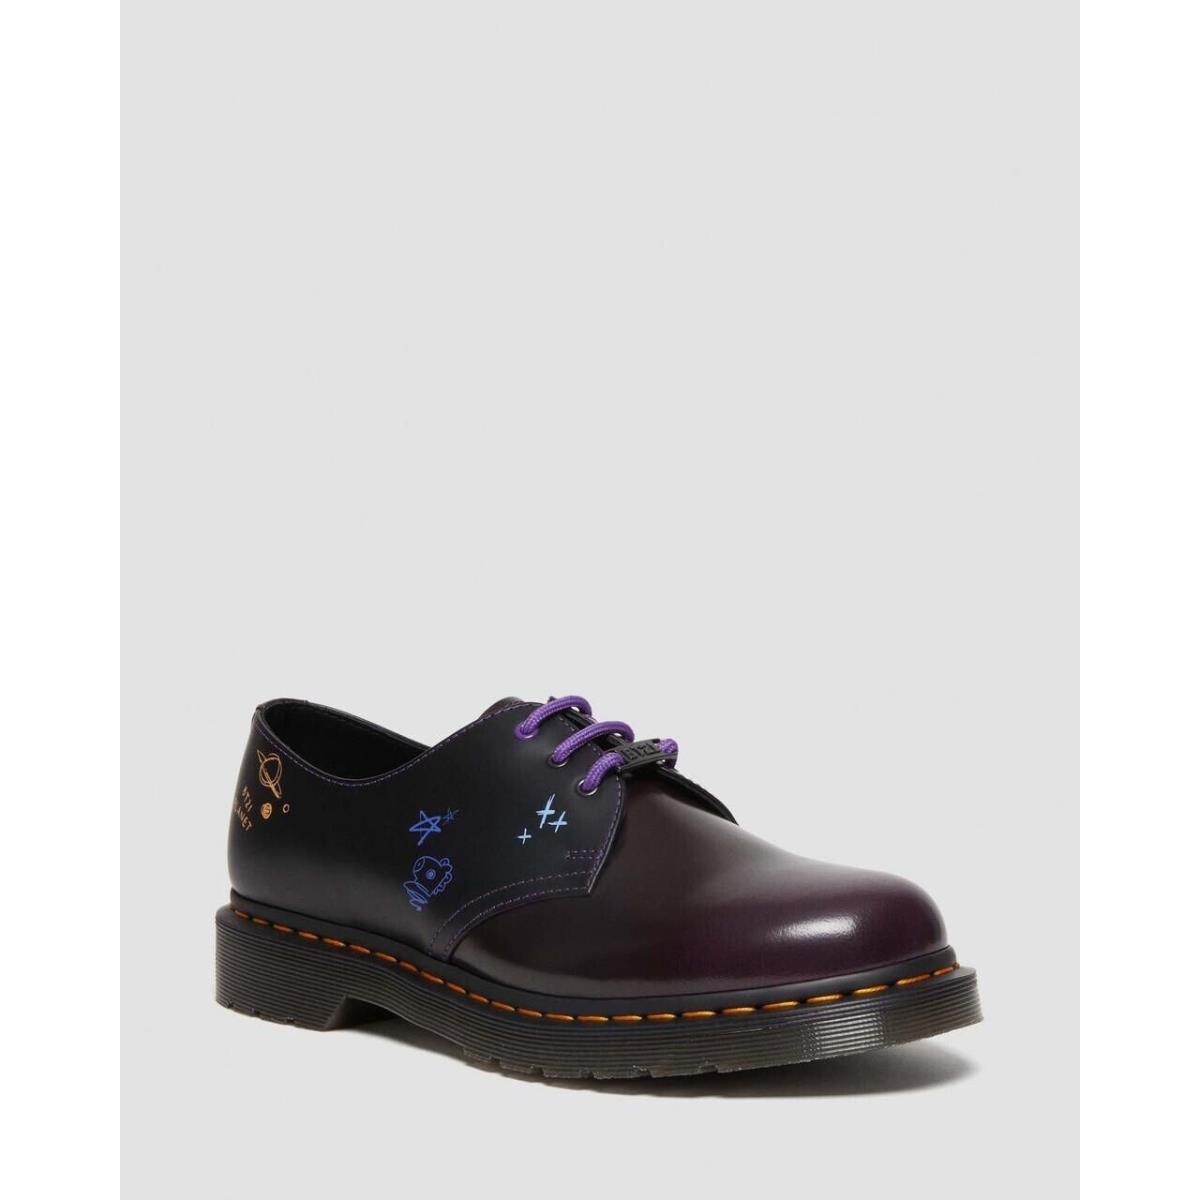 Dr. Martens 1461 BT21 Leather Oxford Shoes BT21 Characters US M8 /L9 Arcadia